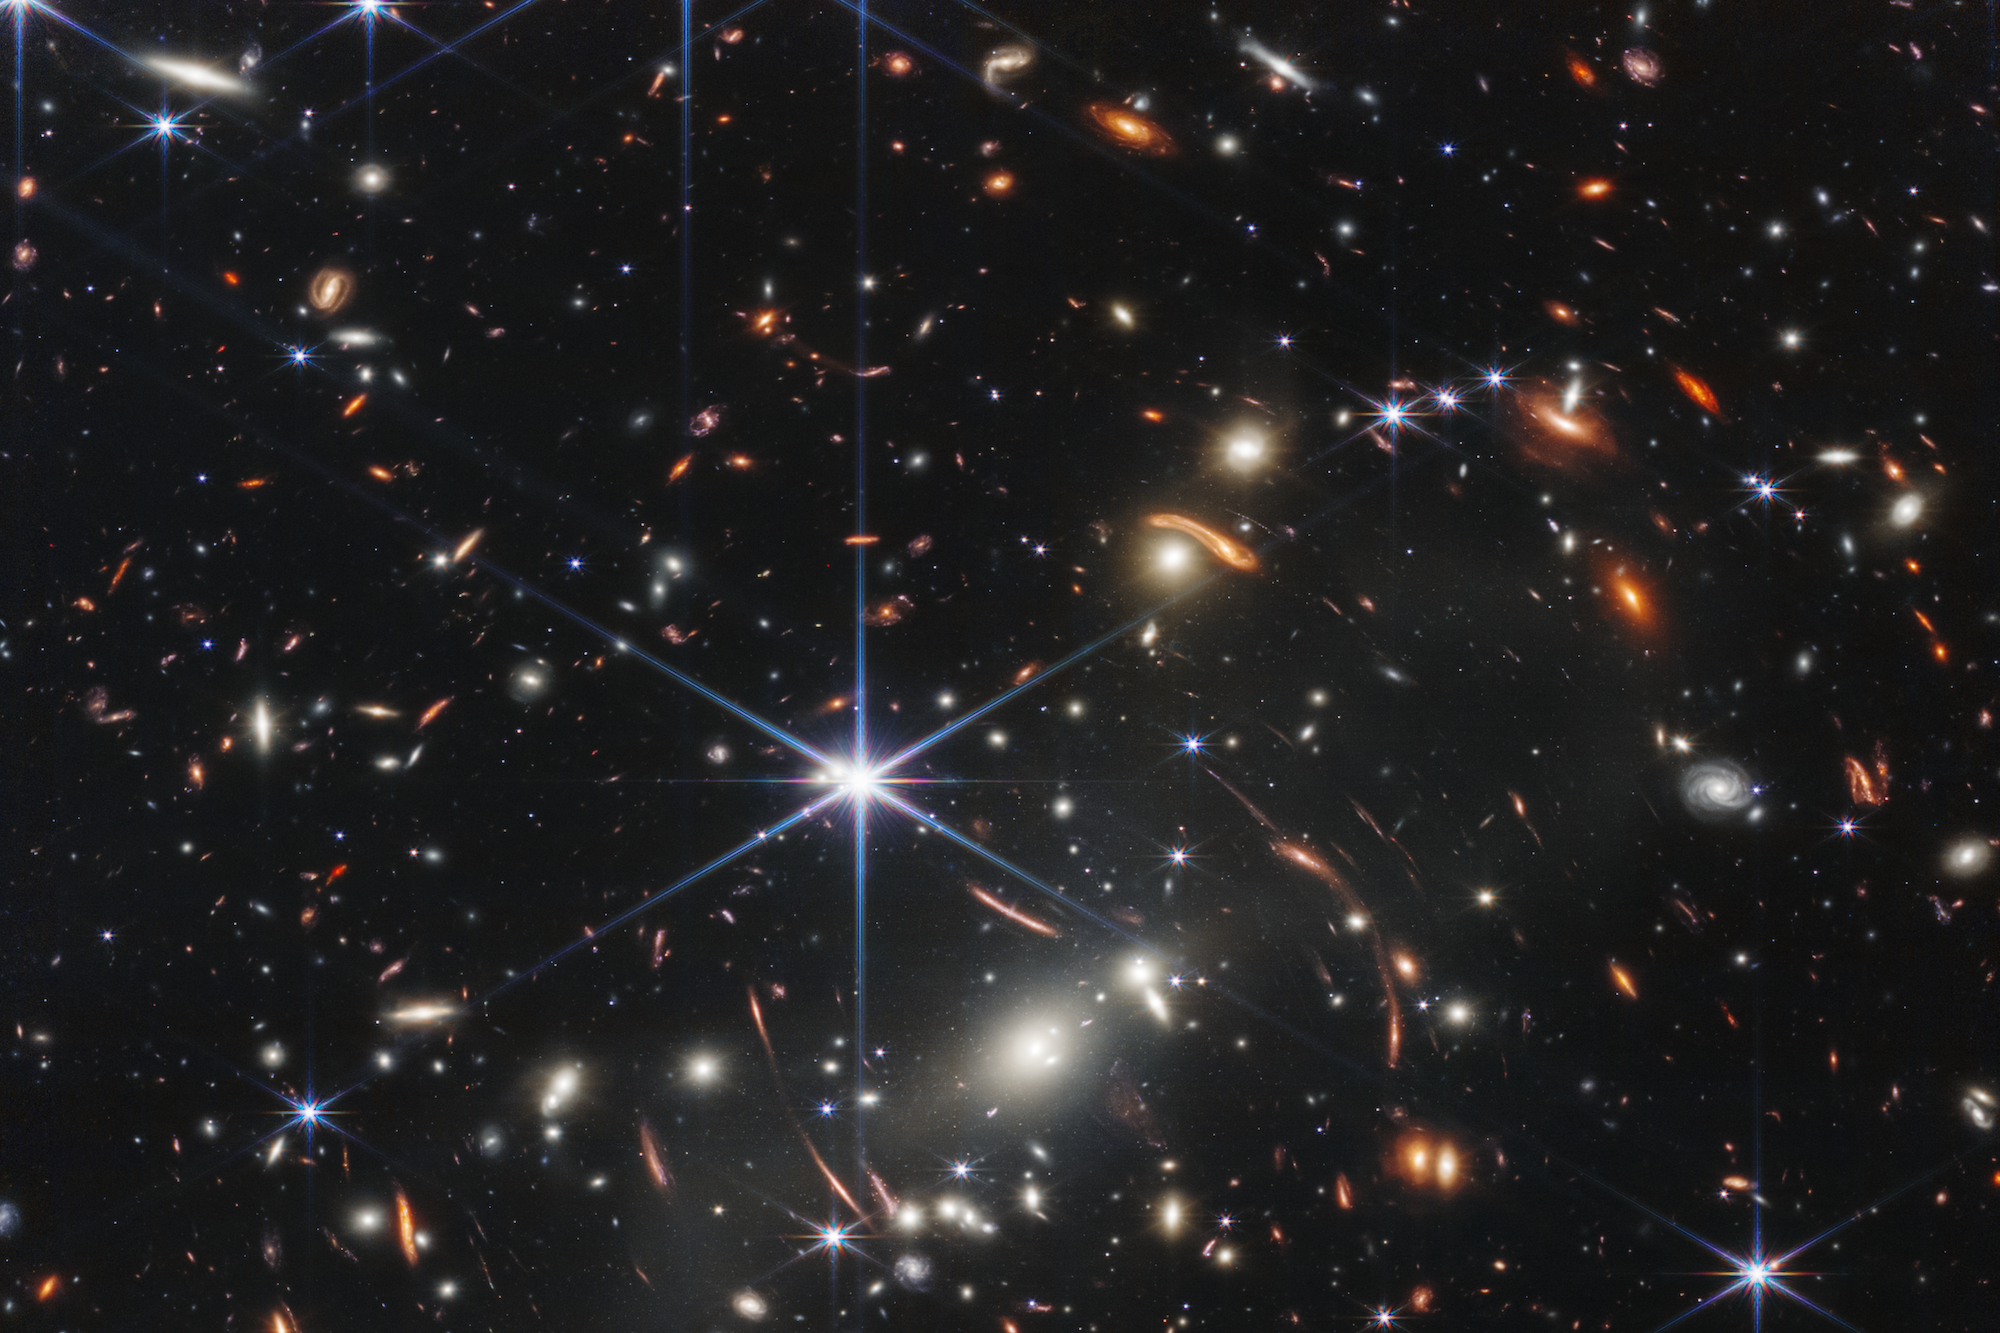 Thousands of small galaxies appear across this view. Their colors vary. Some are shades of orange, while others are white. Most appear as fuzzy ovals, but a few have distinct spiral arms. In front of the galaxies are several foreground stars. Most appear blue, and the bright stars have diffraction spikes, forming an eight-pointed star shape. There are also many thin, long, orange arcs that curve around the center of the image.